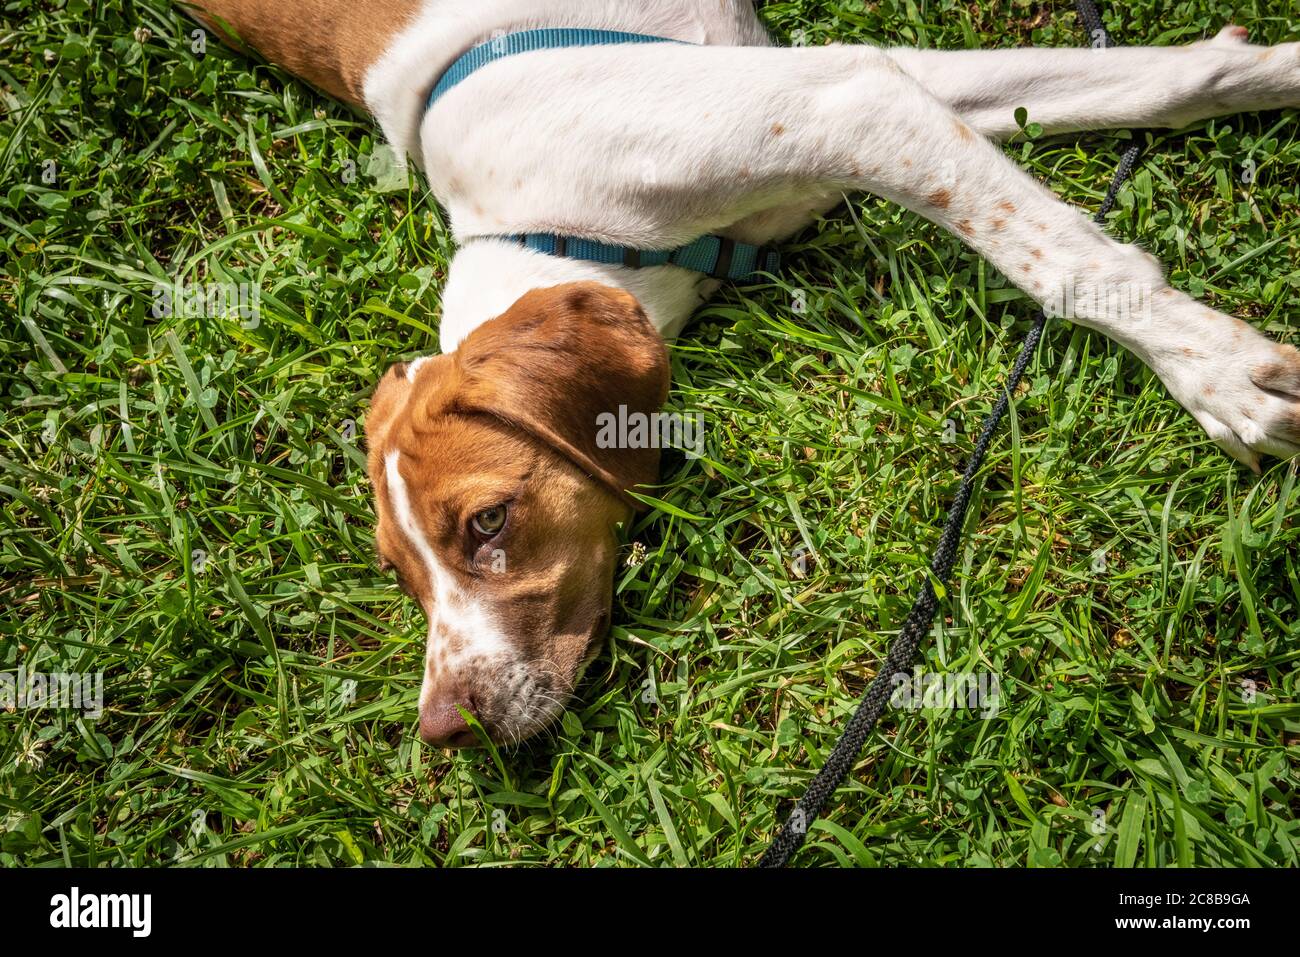 Hound dog resting in the grass. Stock Photo